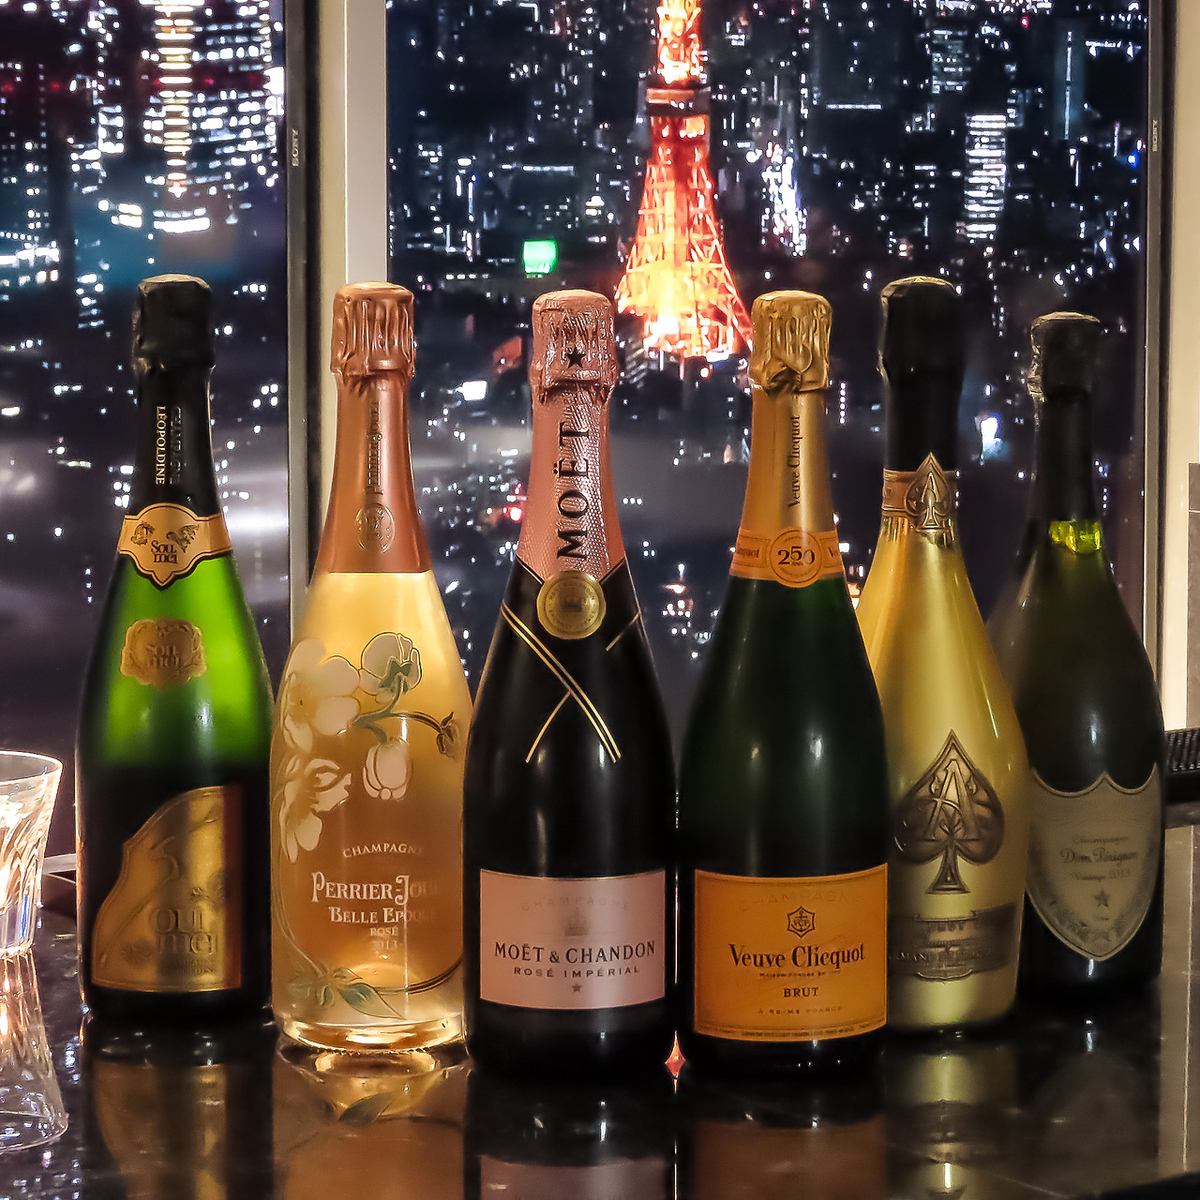 We have a variety of champagnes for celebrations and surprises!